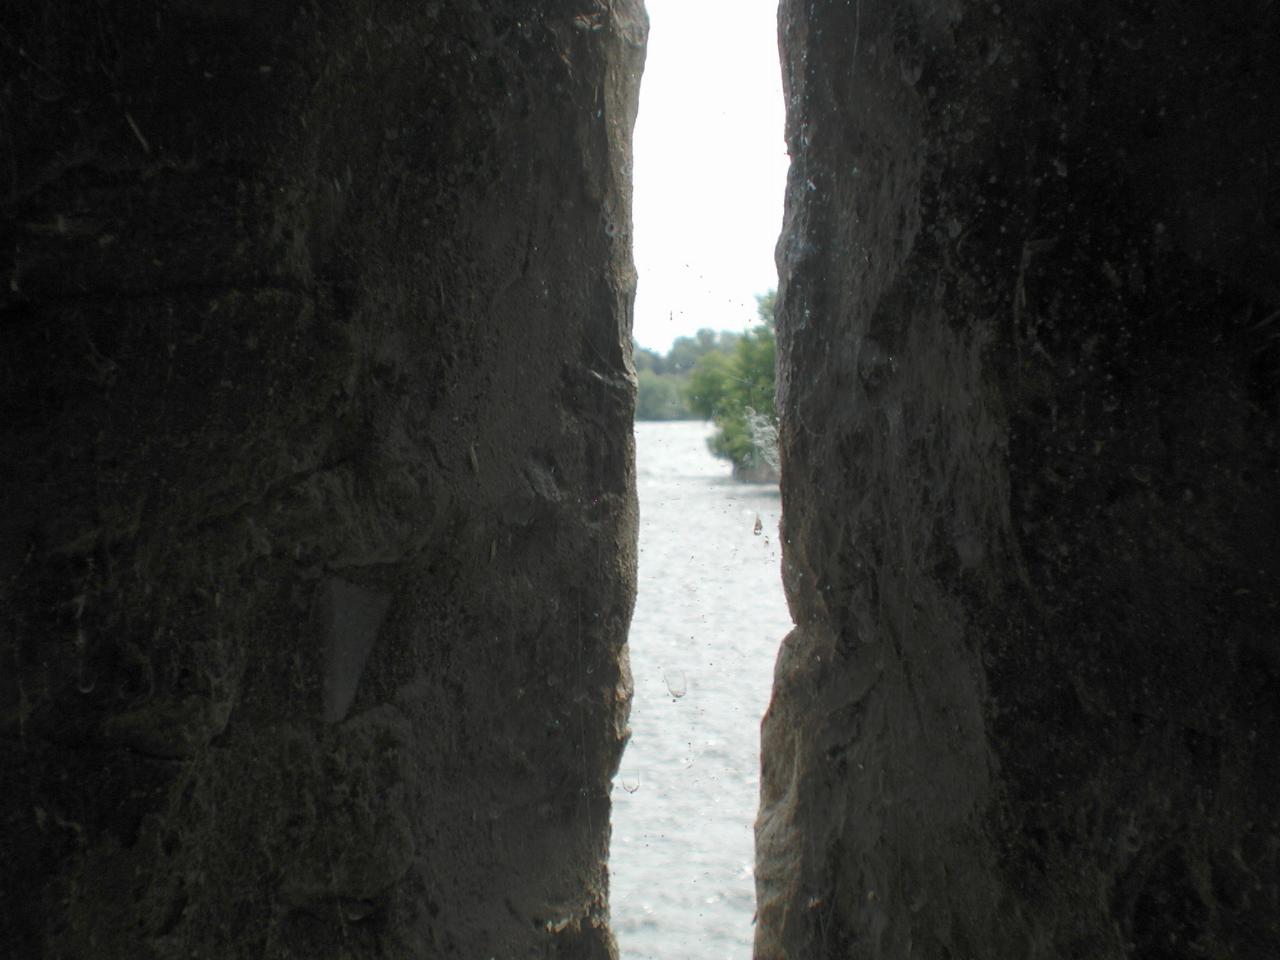 View through the slit, showing the river coming down towards the Fort